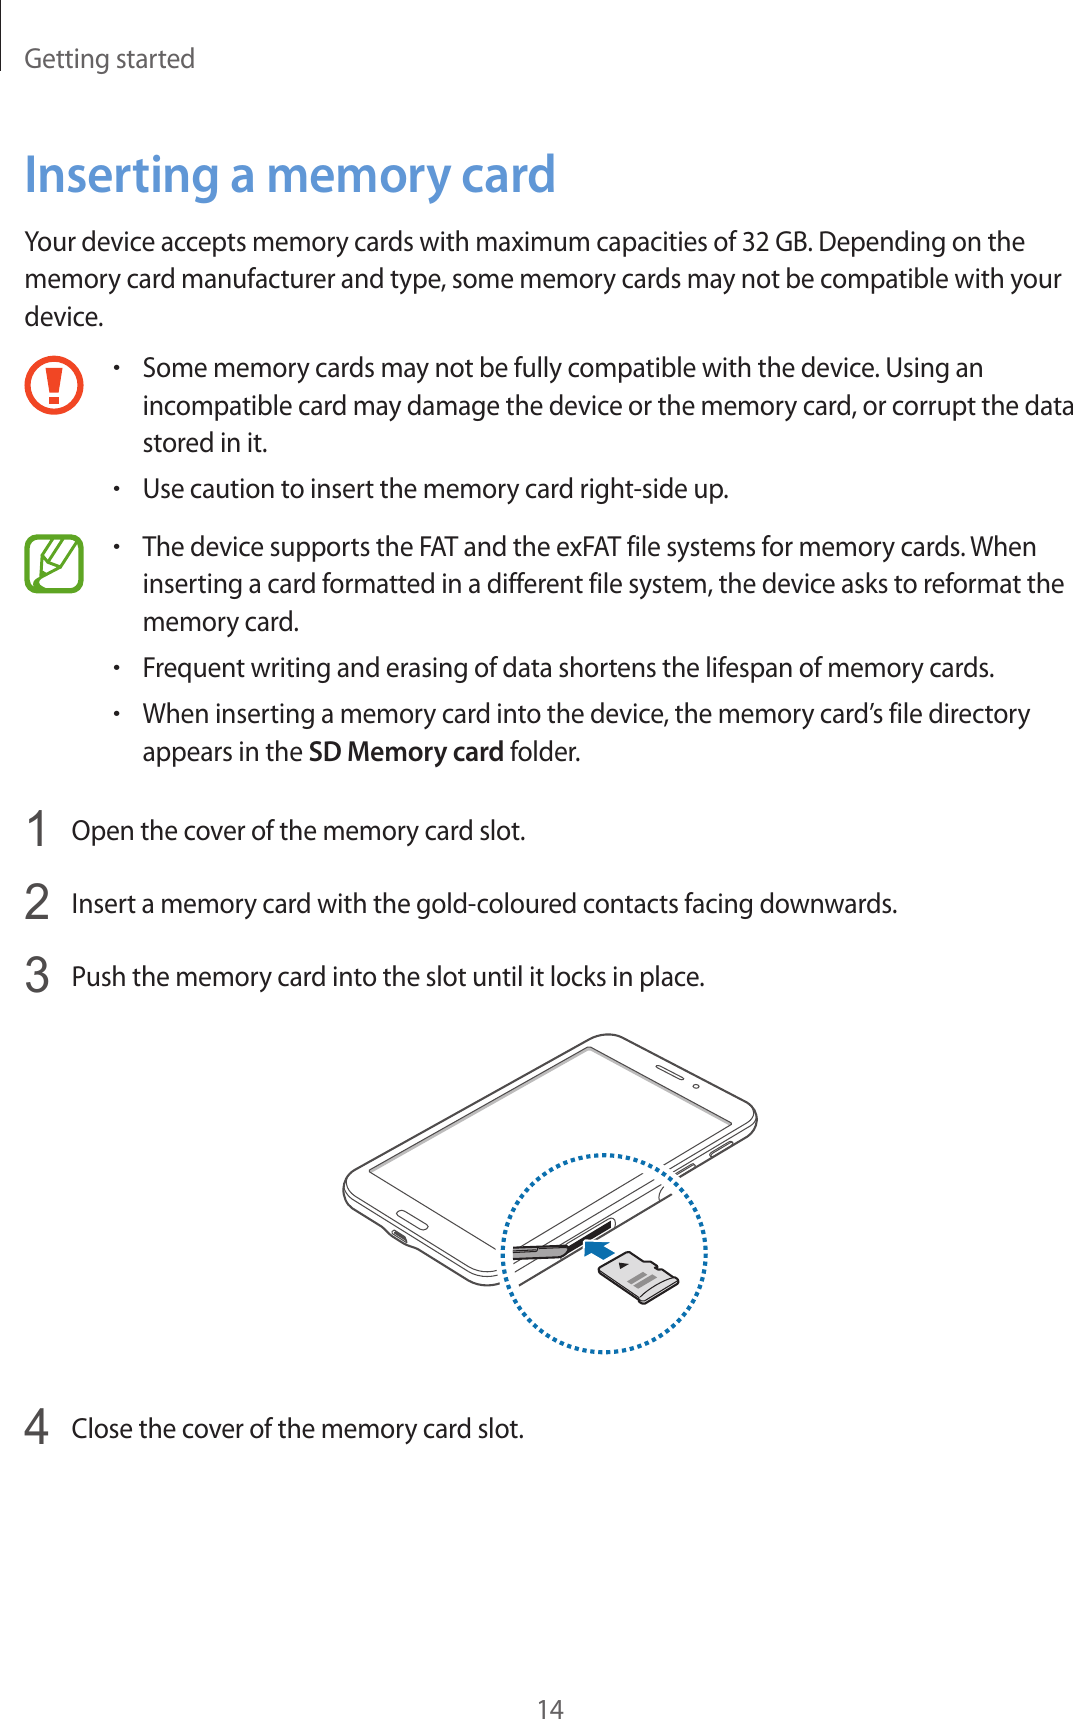 Getting started14Inserting a memory cardYour device accepts memory cards with maximum capacities of 32 GB. Depending on the memory card manufacturer and type, some memory cards may not be compatible with your device.•Some memory cards may not be fully compatible with the device. Using an incompatible card may damage the device or the memory card, or corrupt the data stored in it.•Use caution to insert the memory card right-side up.•The device supports the FAT and the exFAT file systems for memory cards. When inserting a card formatted in a different file system, the device asks to reformat the memory card.•Frequent writing and erasing of data shortens the lifespan of memory cards.•When inserting a memory card into the device, the memory card’s file directory appears in the SD Memory card folder.1  Open the cover of the memory card slot.2  Insert a memory card with the gold-coloured contacts facing downwards.3  Push the memory card into the slot until it locks in place.4  Close the cover of the memory card slot.